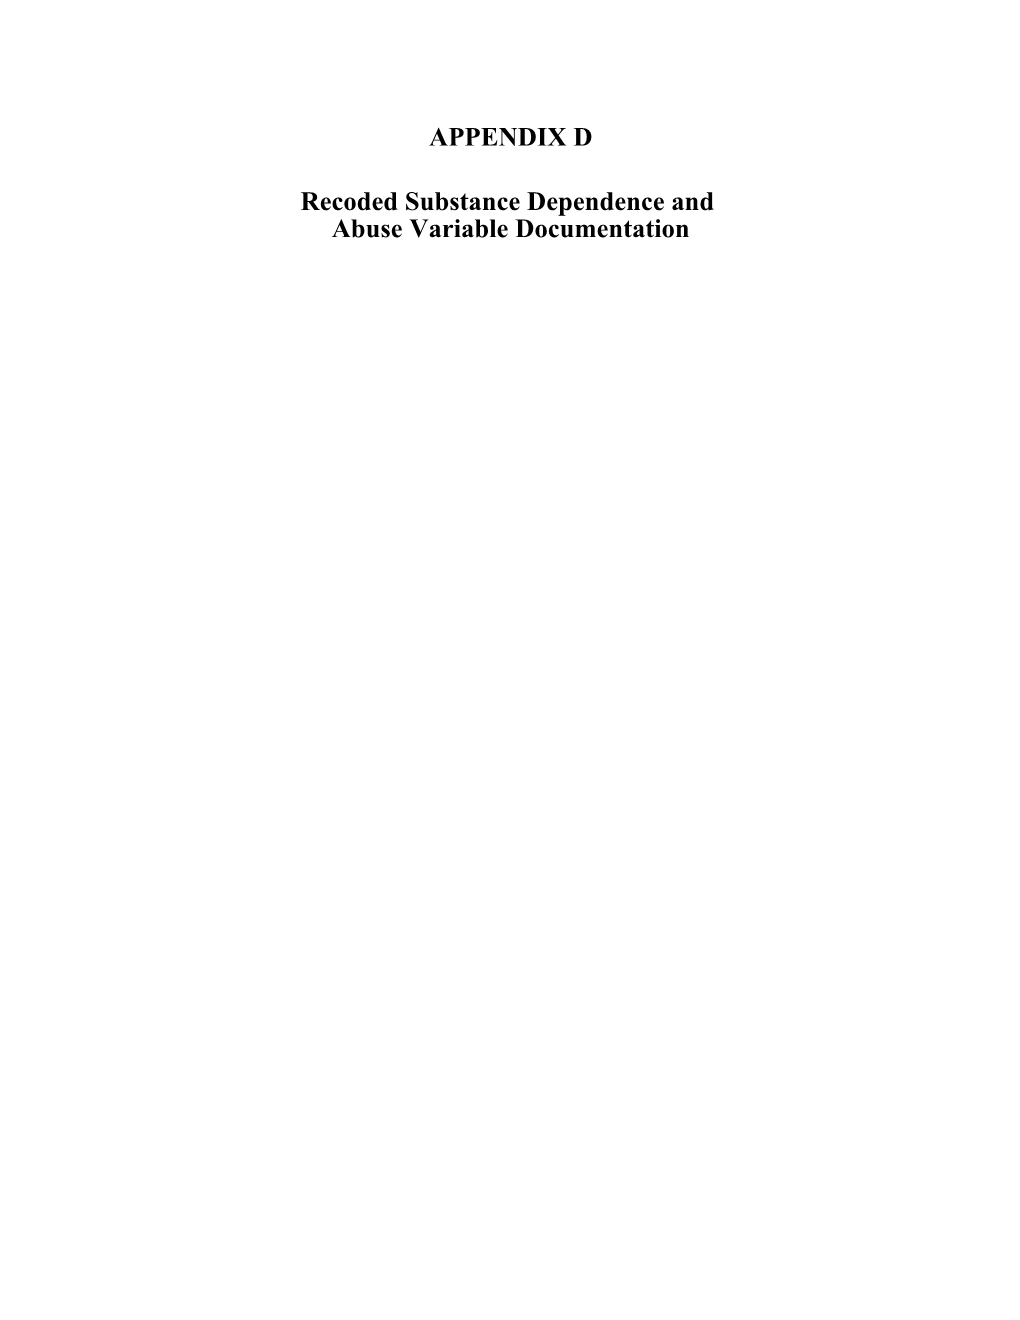 Recoded Substance Dependence and Abuse Variable Documentation